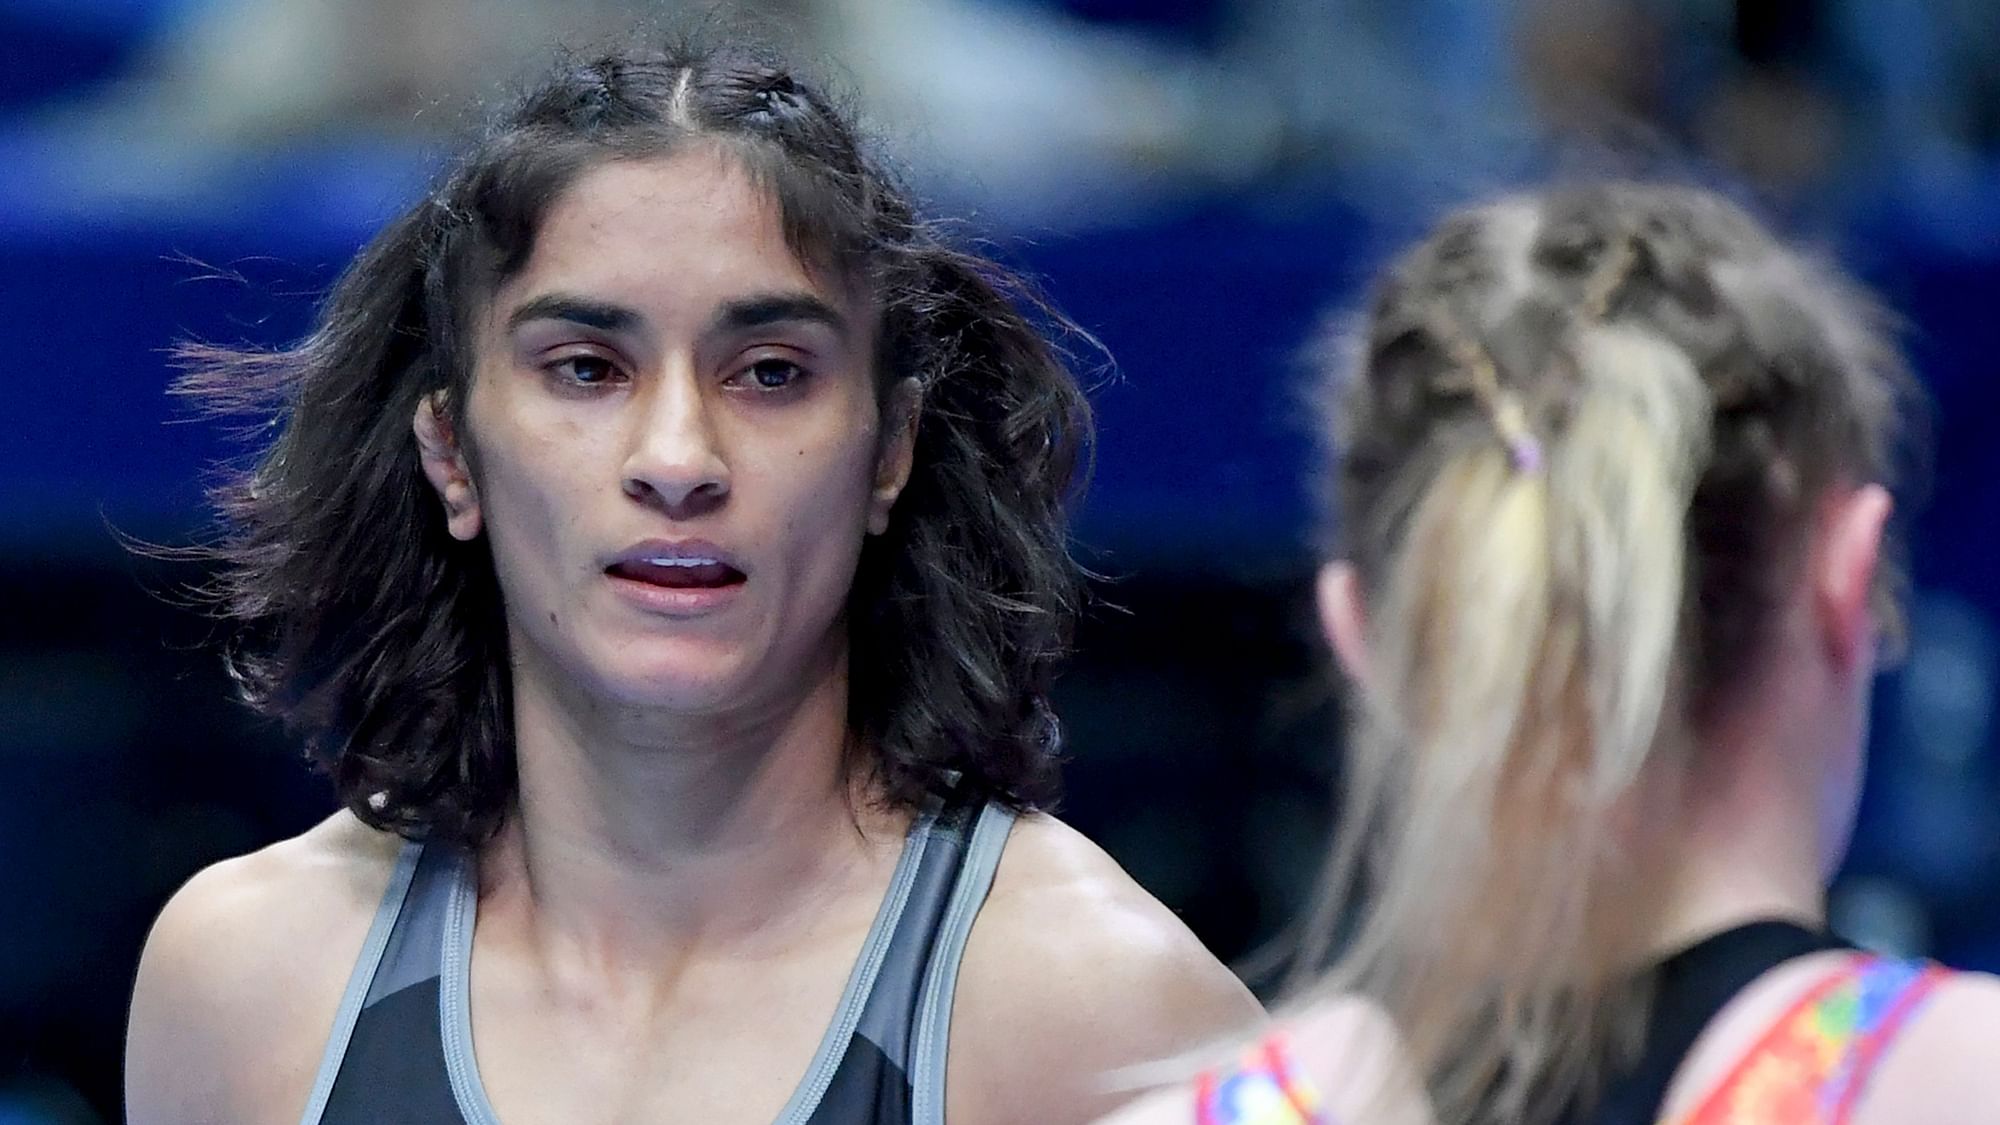 Vinesh Phogat’s skills at the World Championships are being appreciated by rivals and coaches.